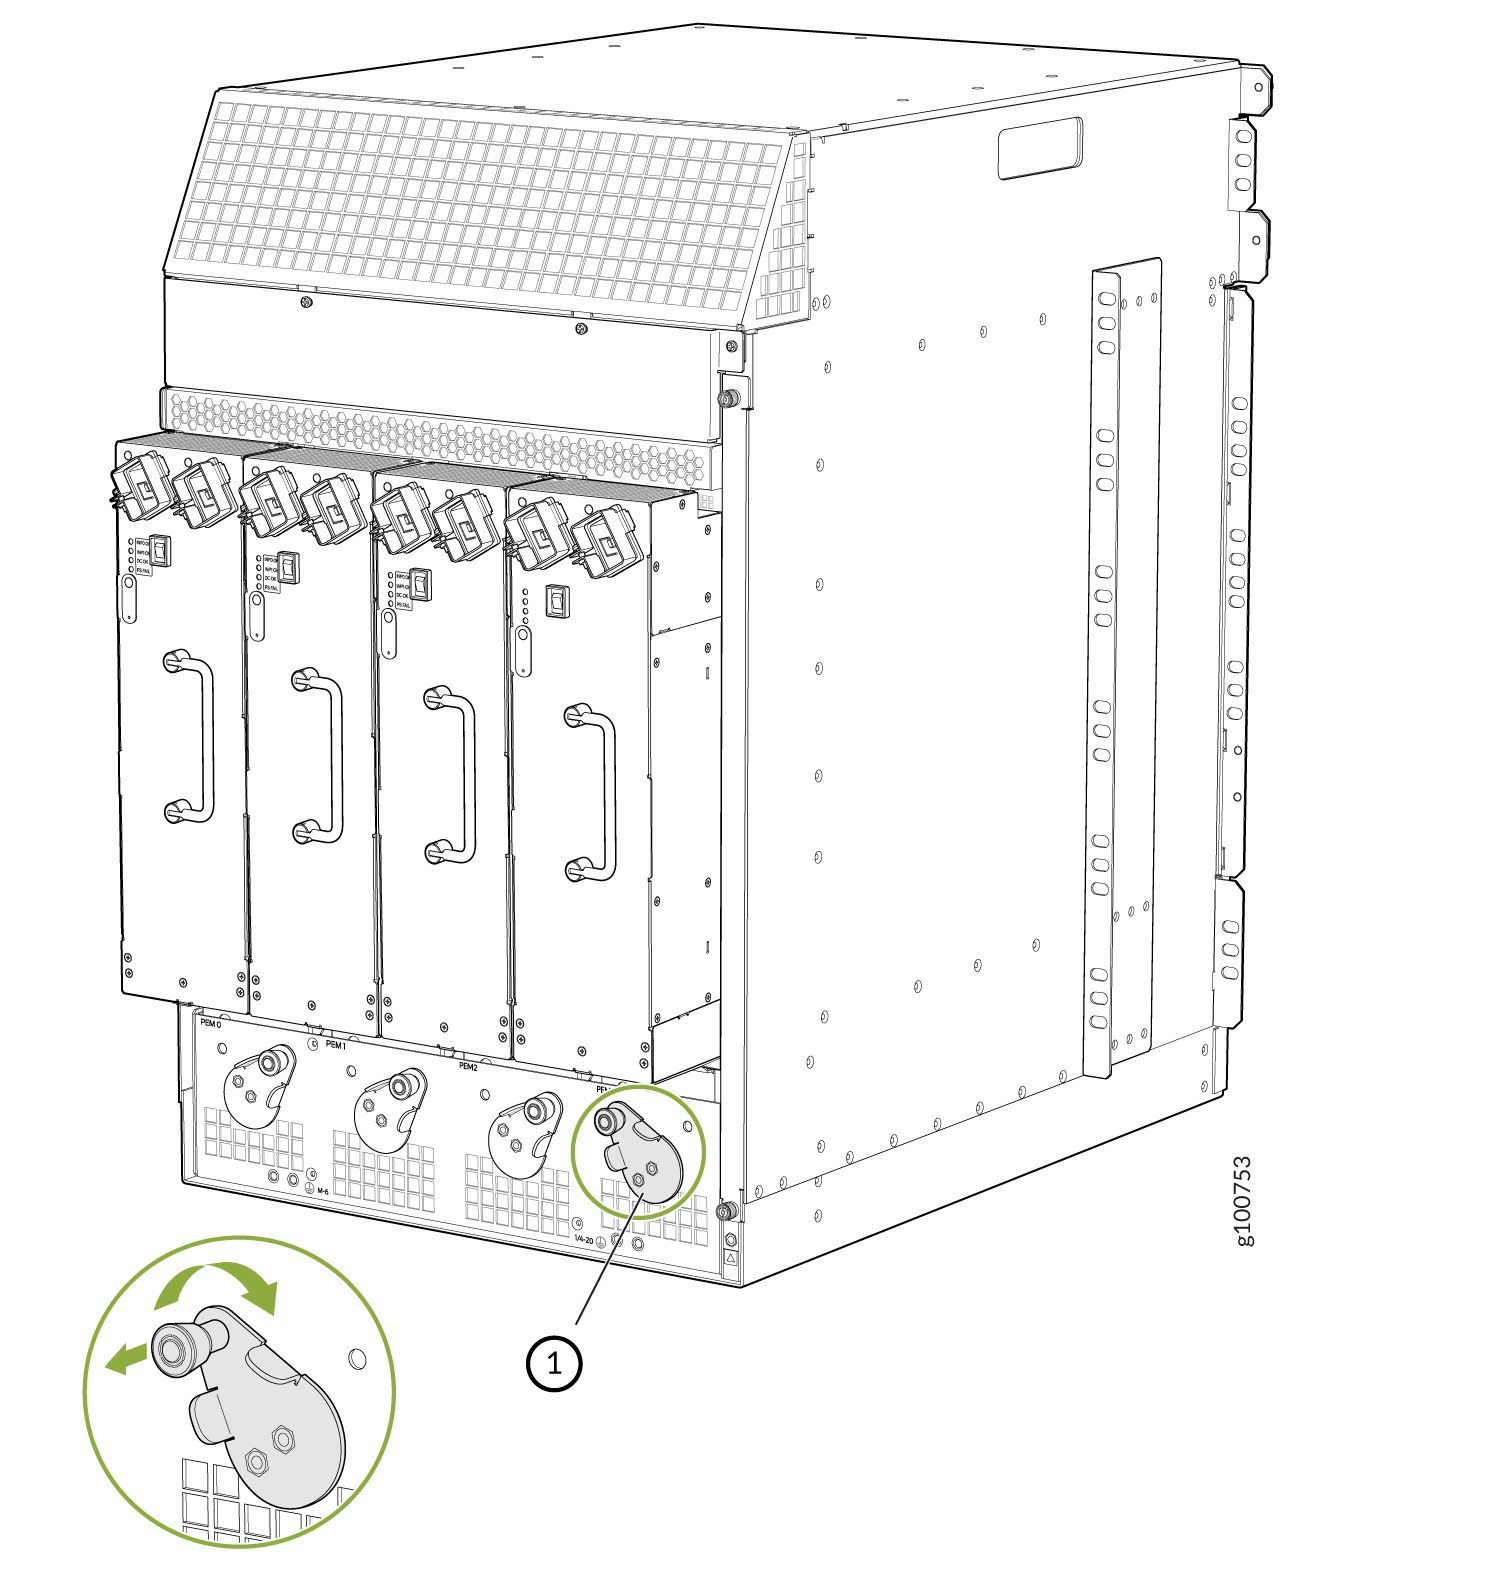 MX960 with High-Capacity Second Generation AC Power Supplies Installed